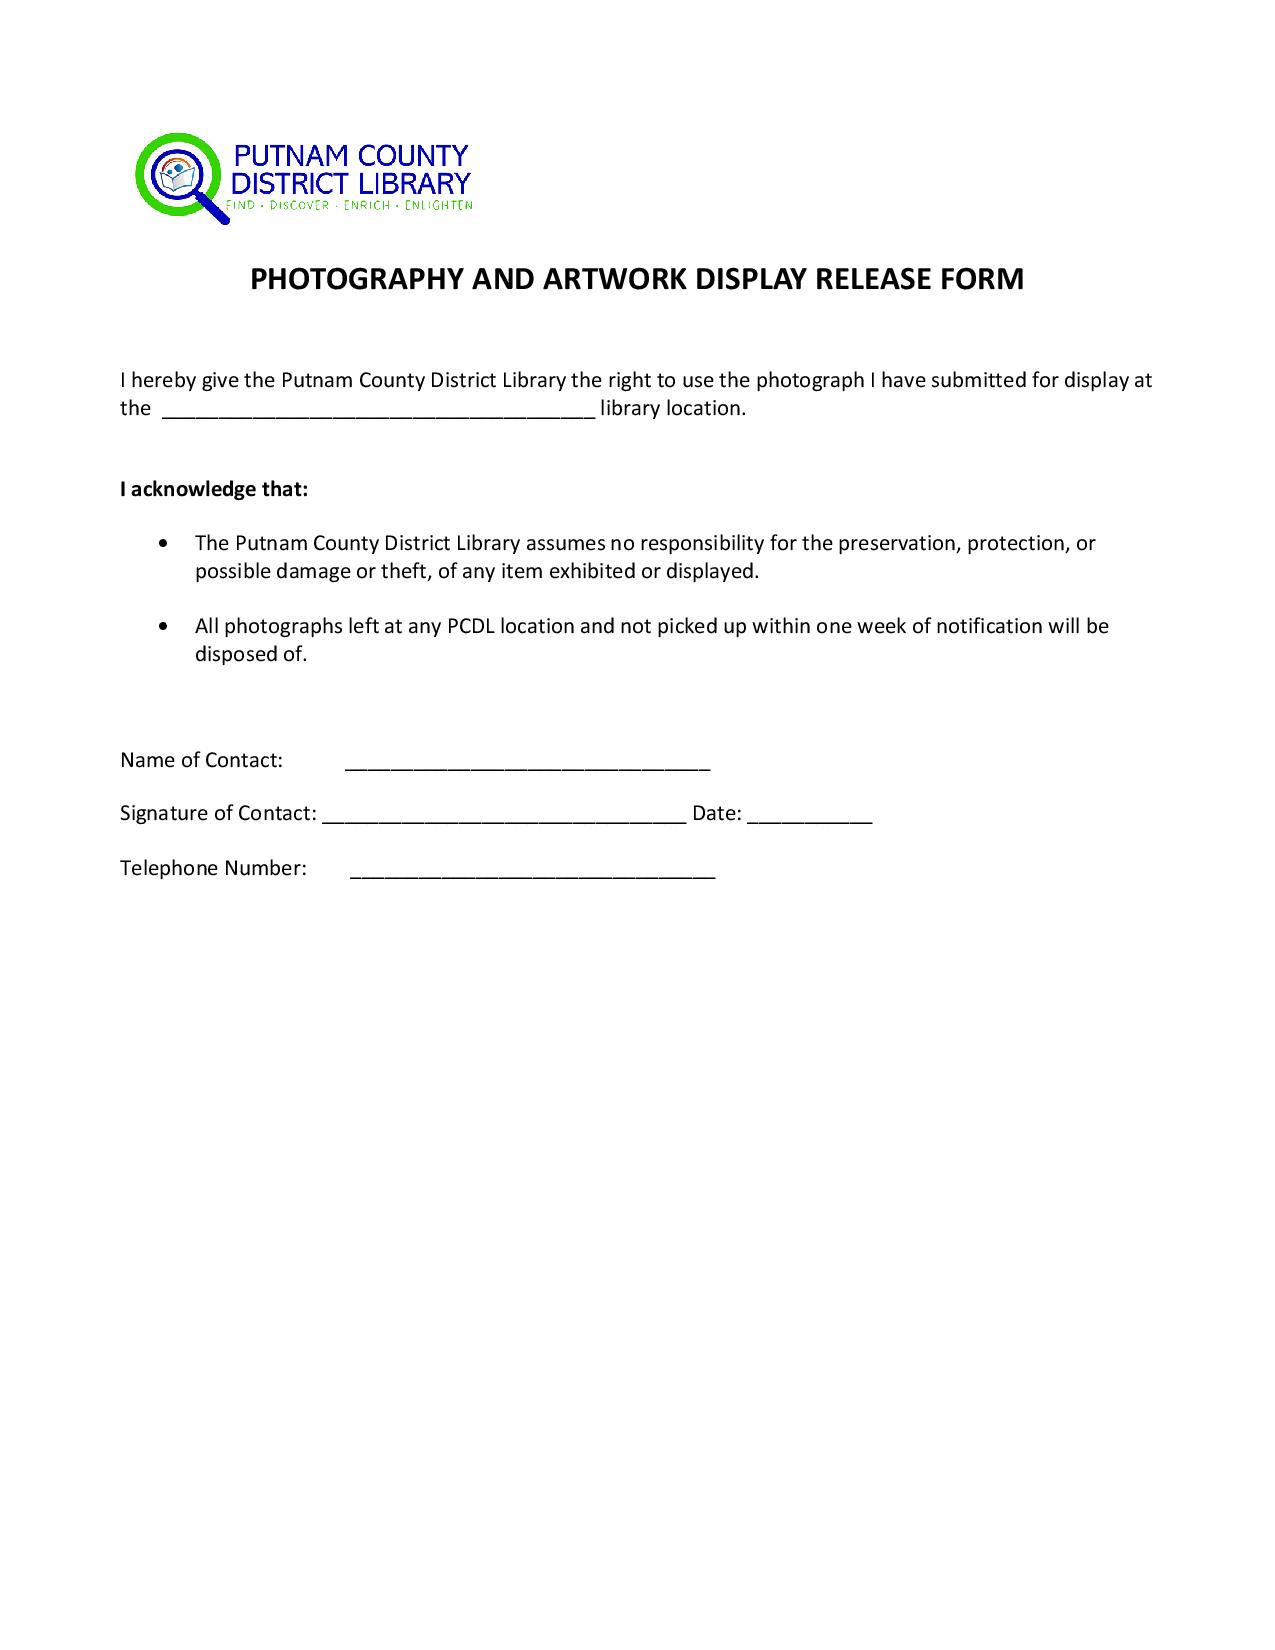 Photography and Artwork Display Release Form